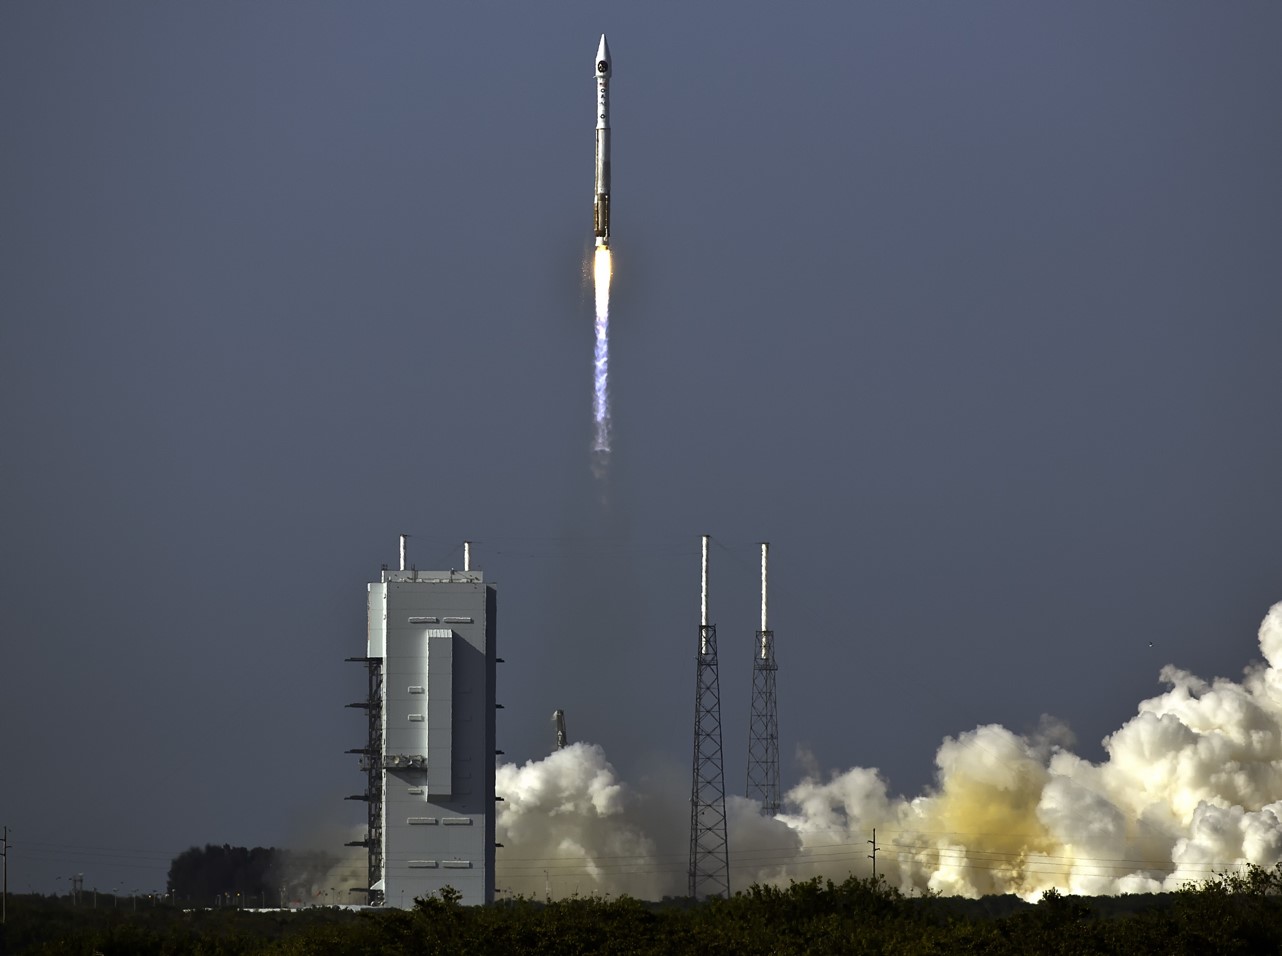 AmericaSpace-photo-of-recent-launch-of-United-Launch-Alliance-Atlas-V-401-rocket-with-SBIRS-GEO-2-spacecraft-Photo-Credit-John-Studwell1